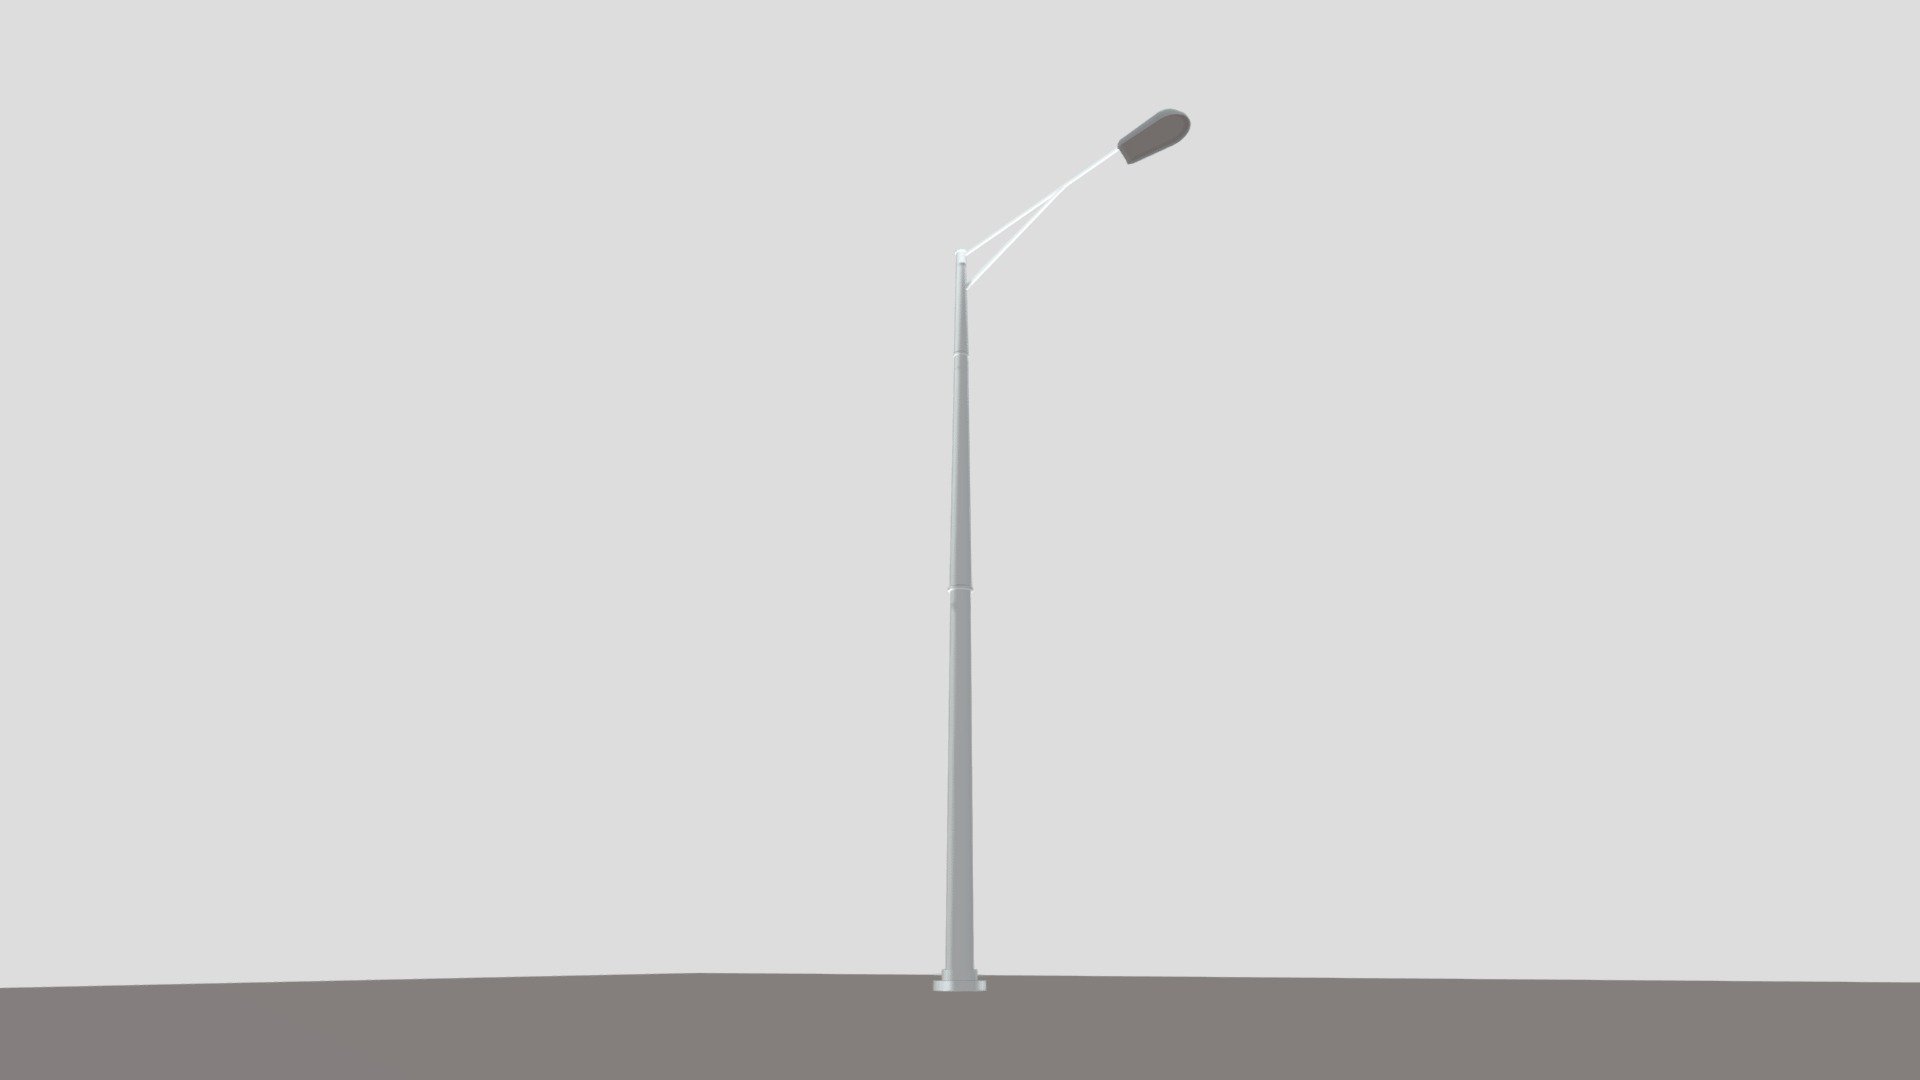 this is a model of a pole light can be used in city/street scene or in your games this is a low poly model i hope you like it 3d model